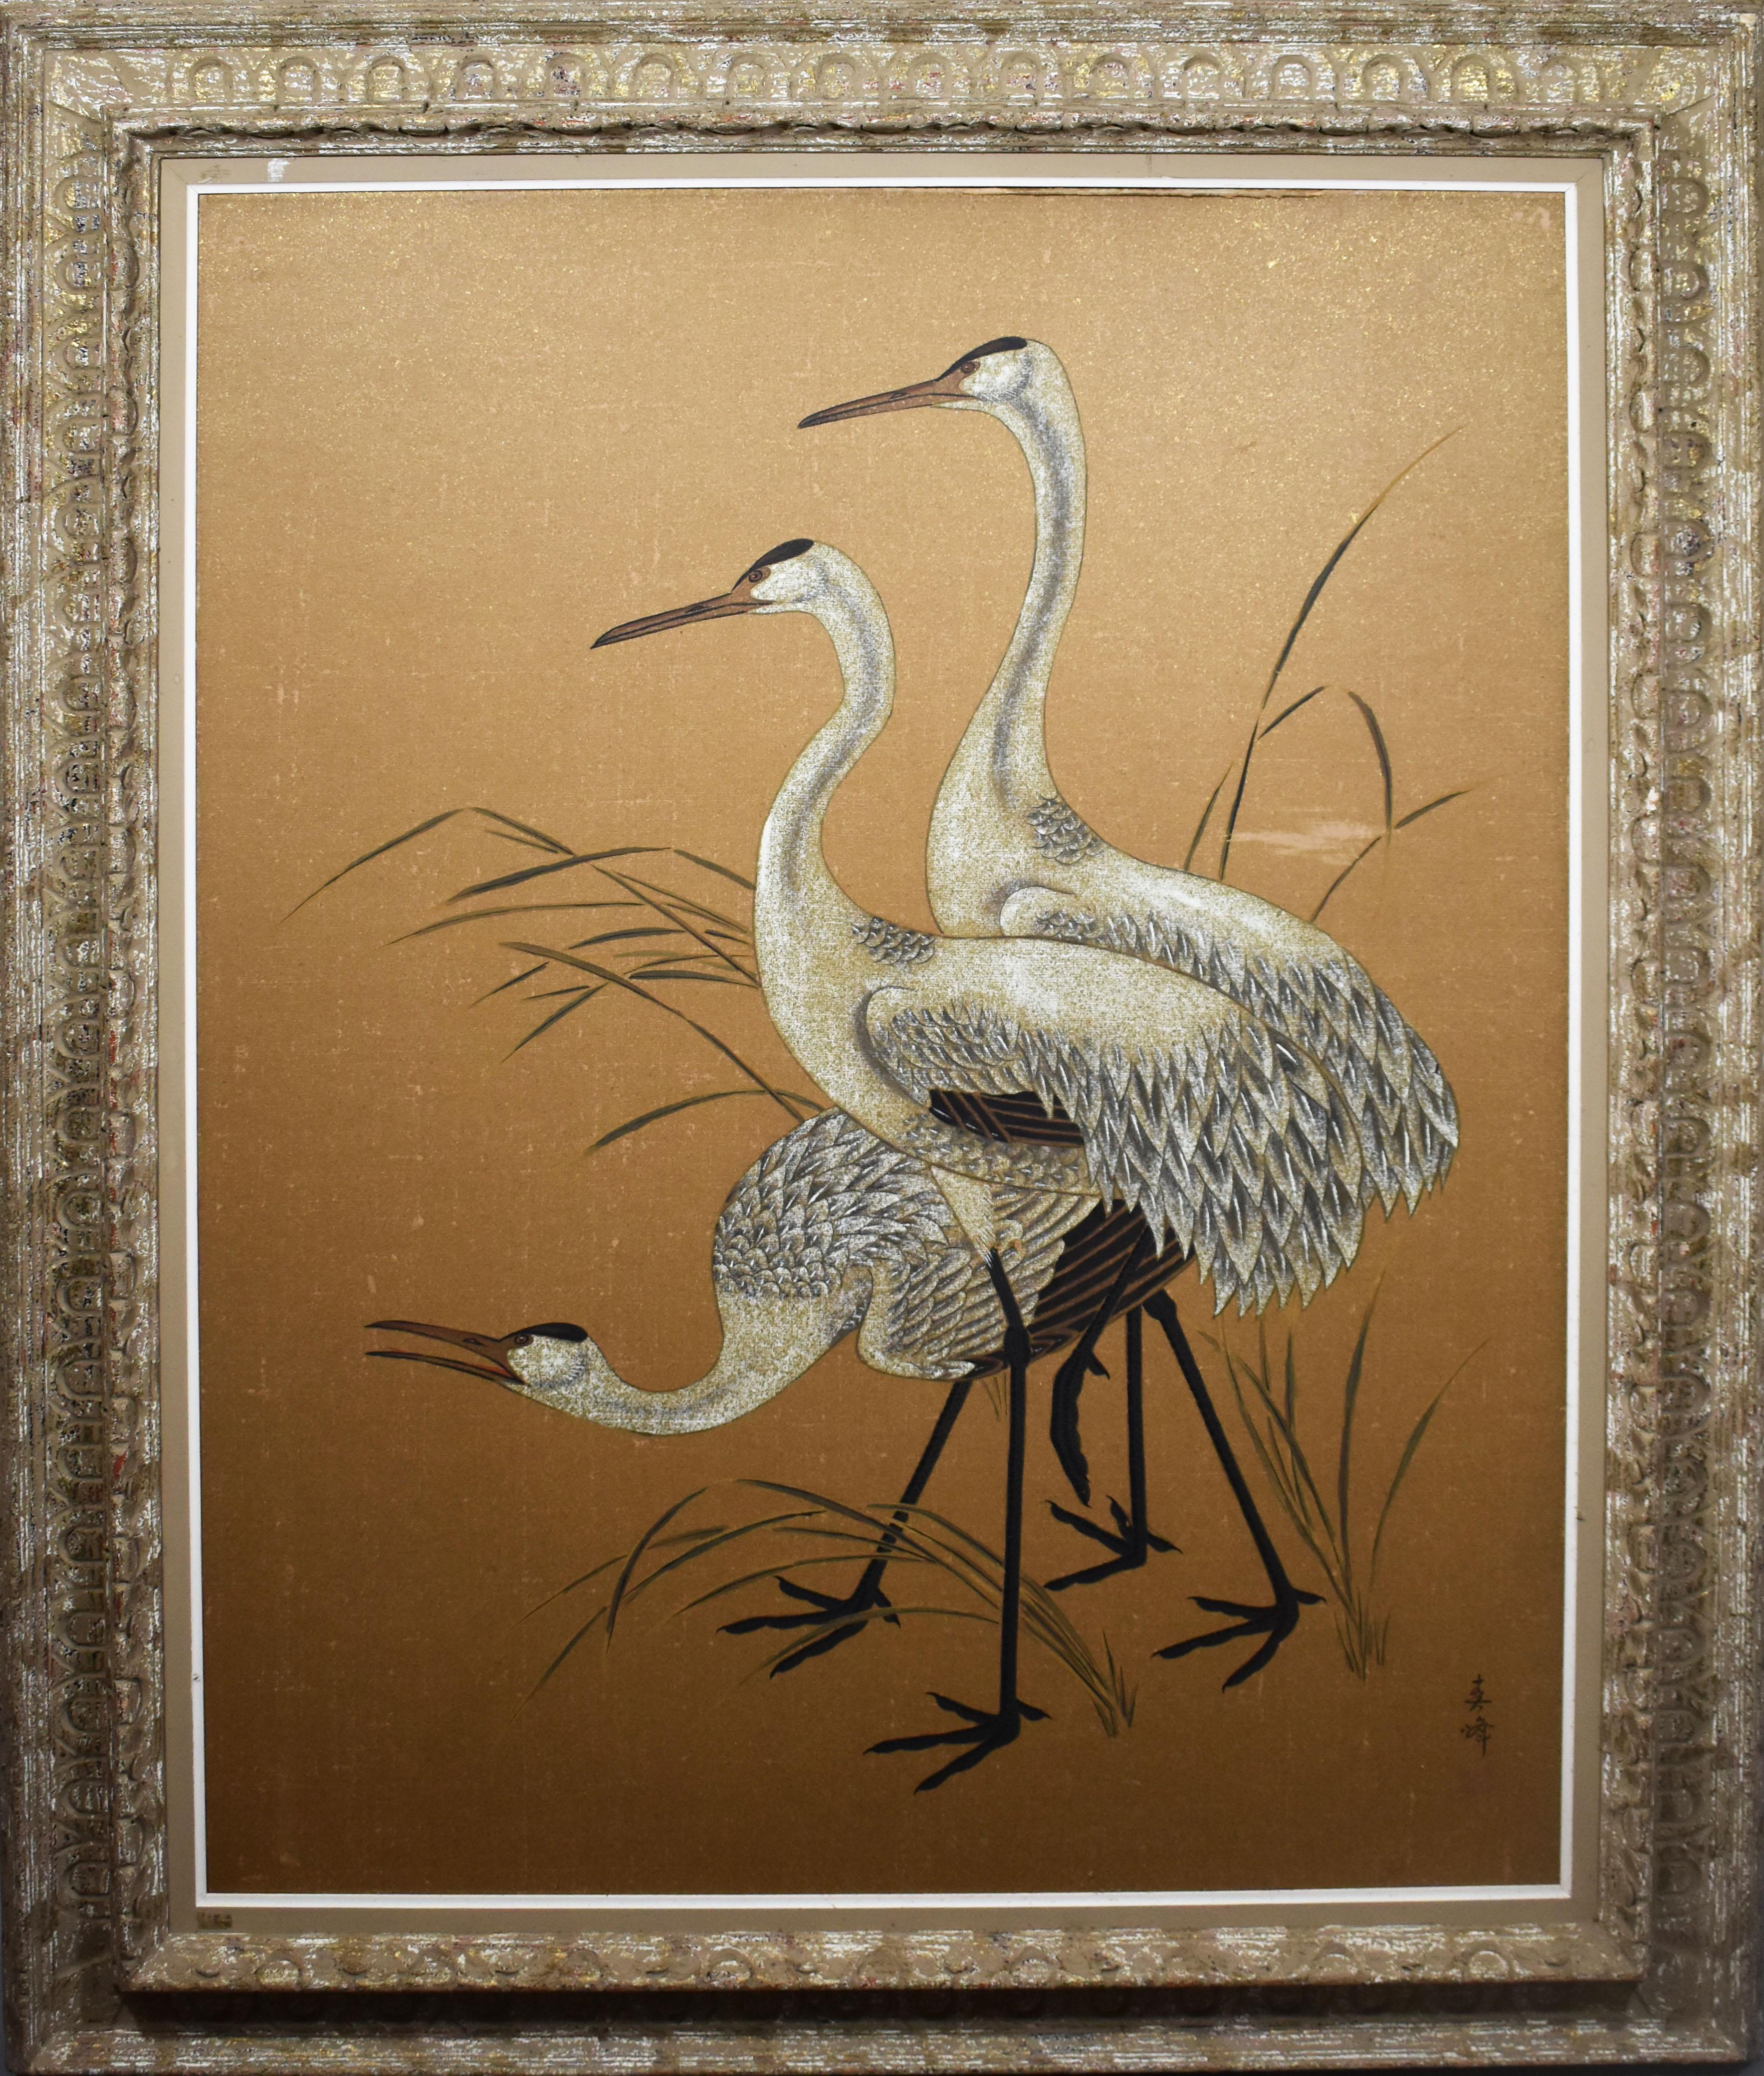 Unknown Landscape Painting - Antique Large Asian Chinese Modern Animal Portrait of Cranes Original Painting 